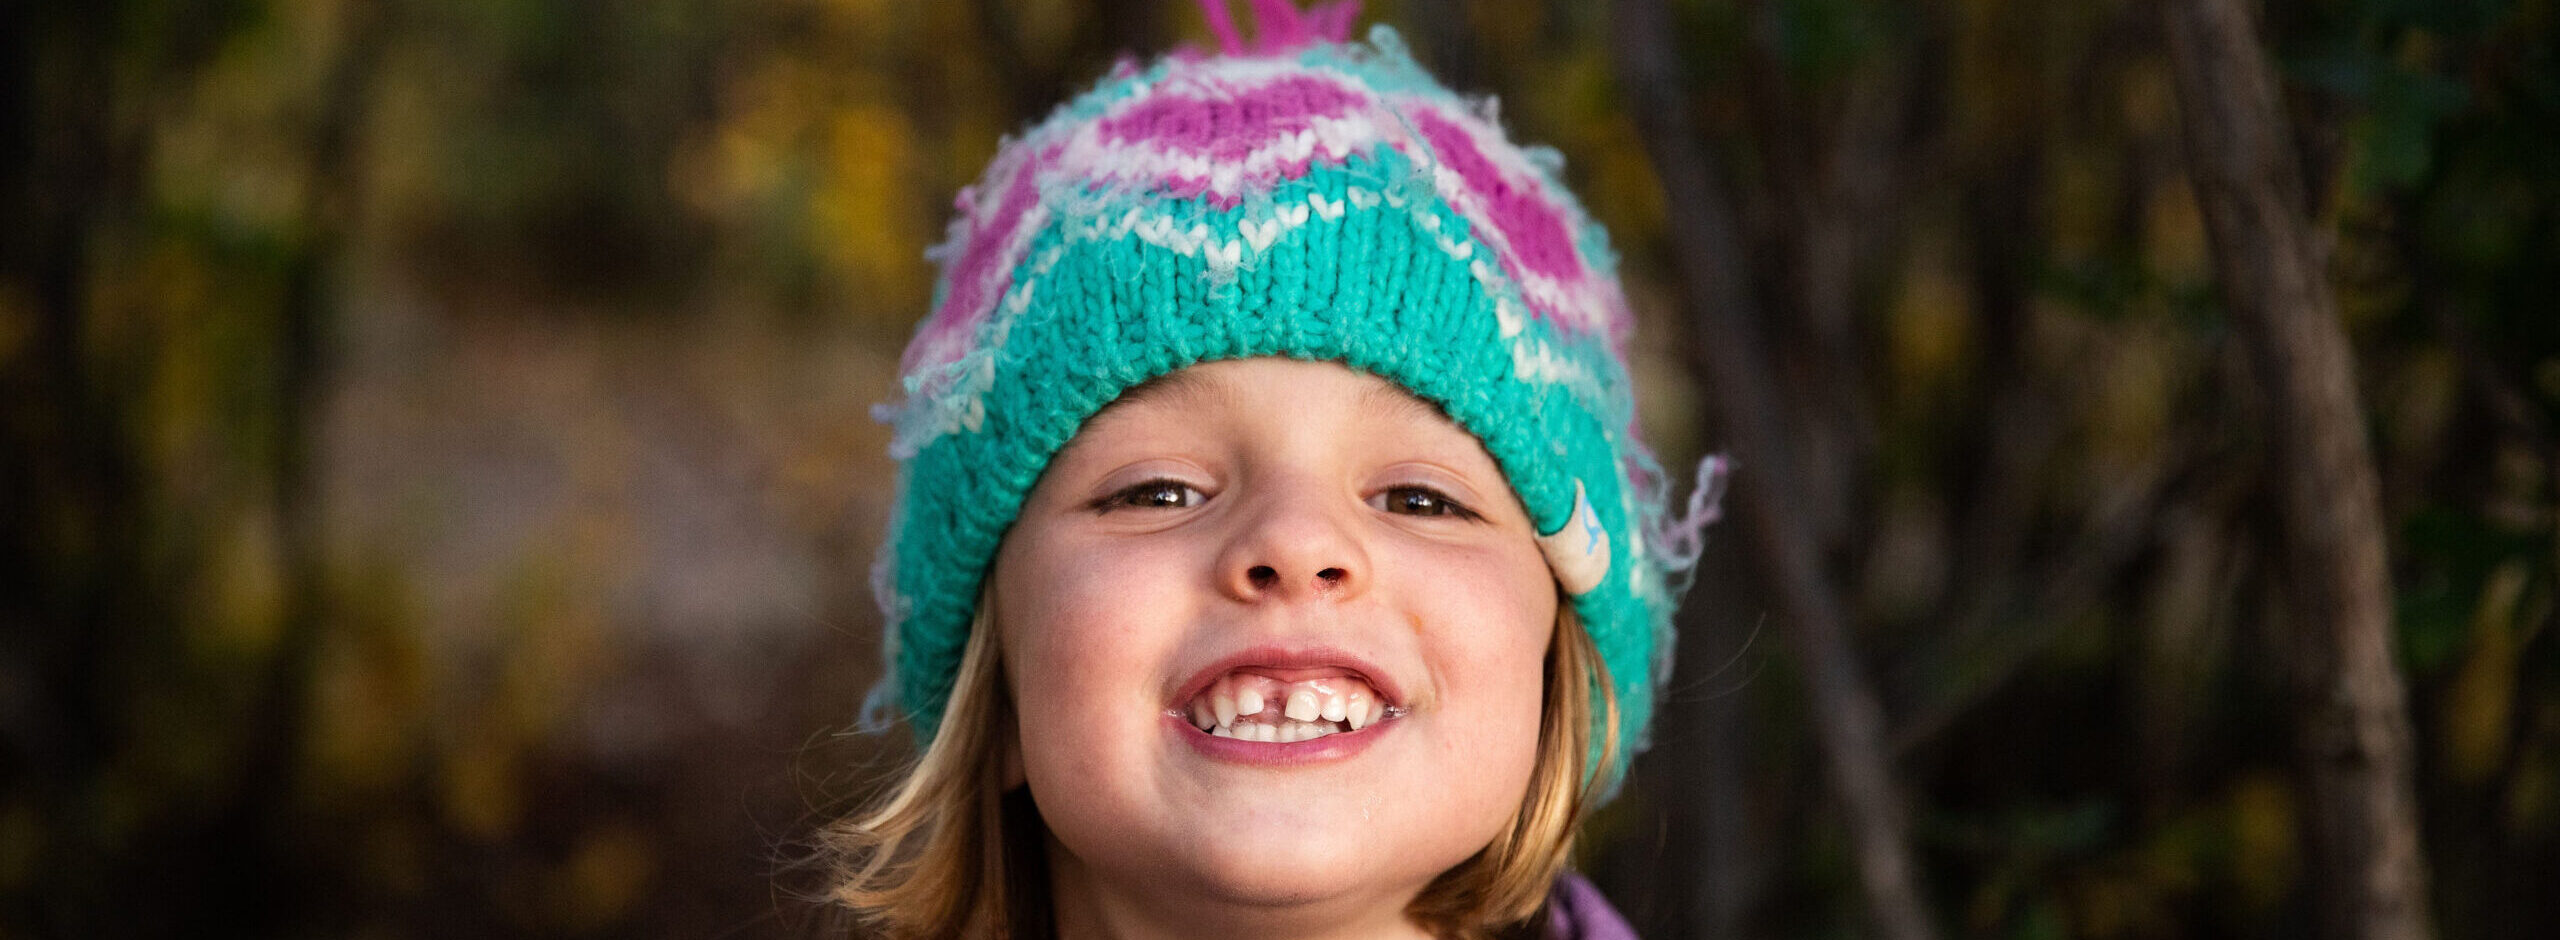 This up-close photo captures a girl wearing a vibrant purple and teal crocheted beanie, her big smile reflecting pure happiness.